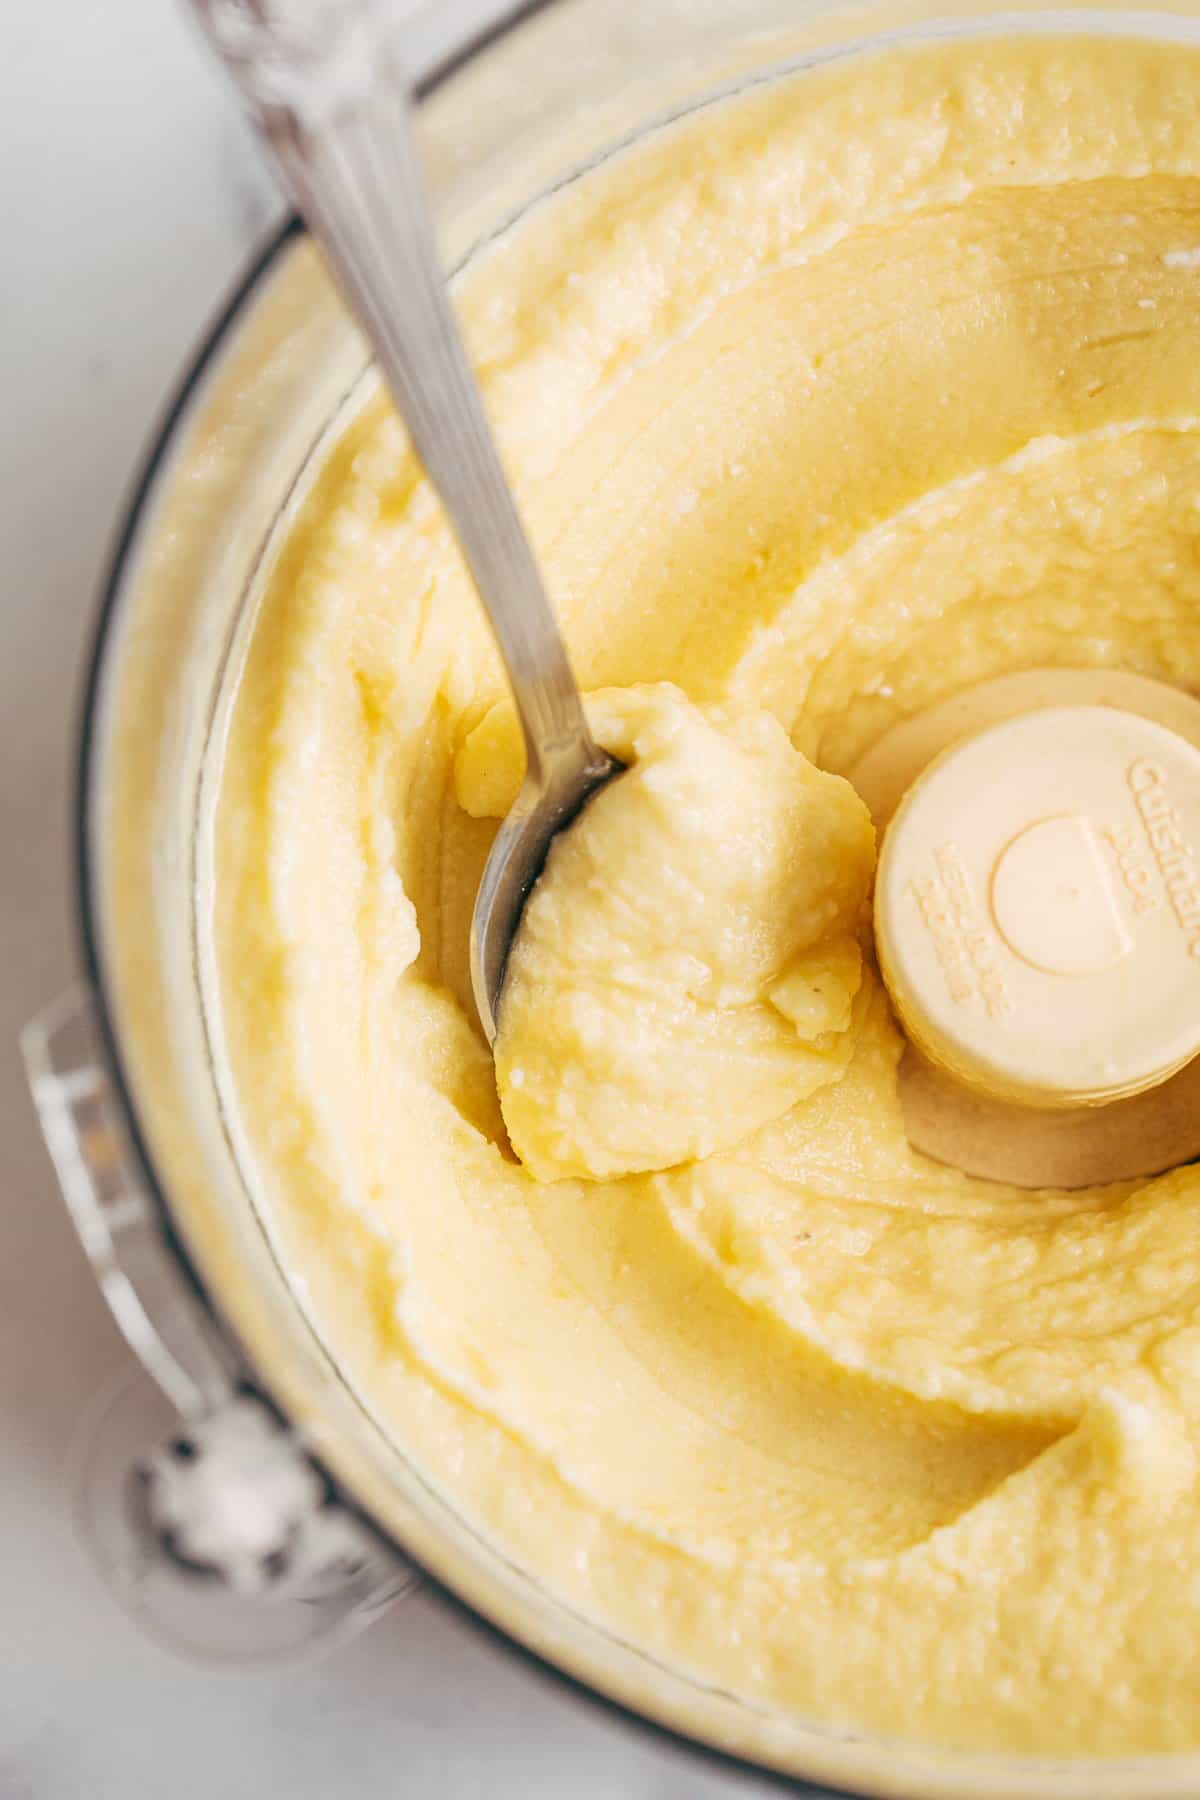 Dole whip in a food processor with a spoon.